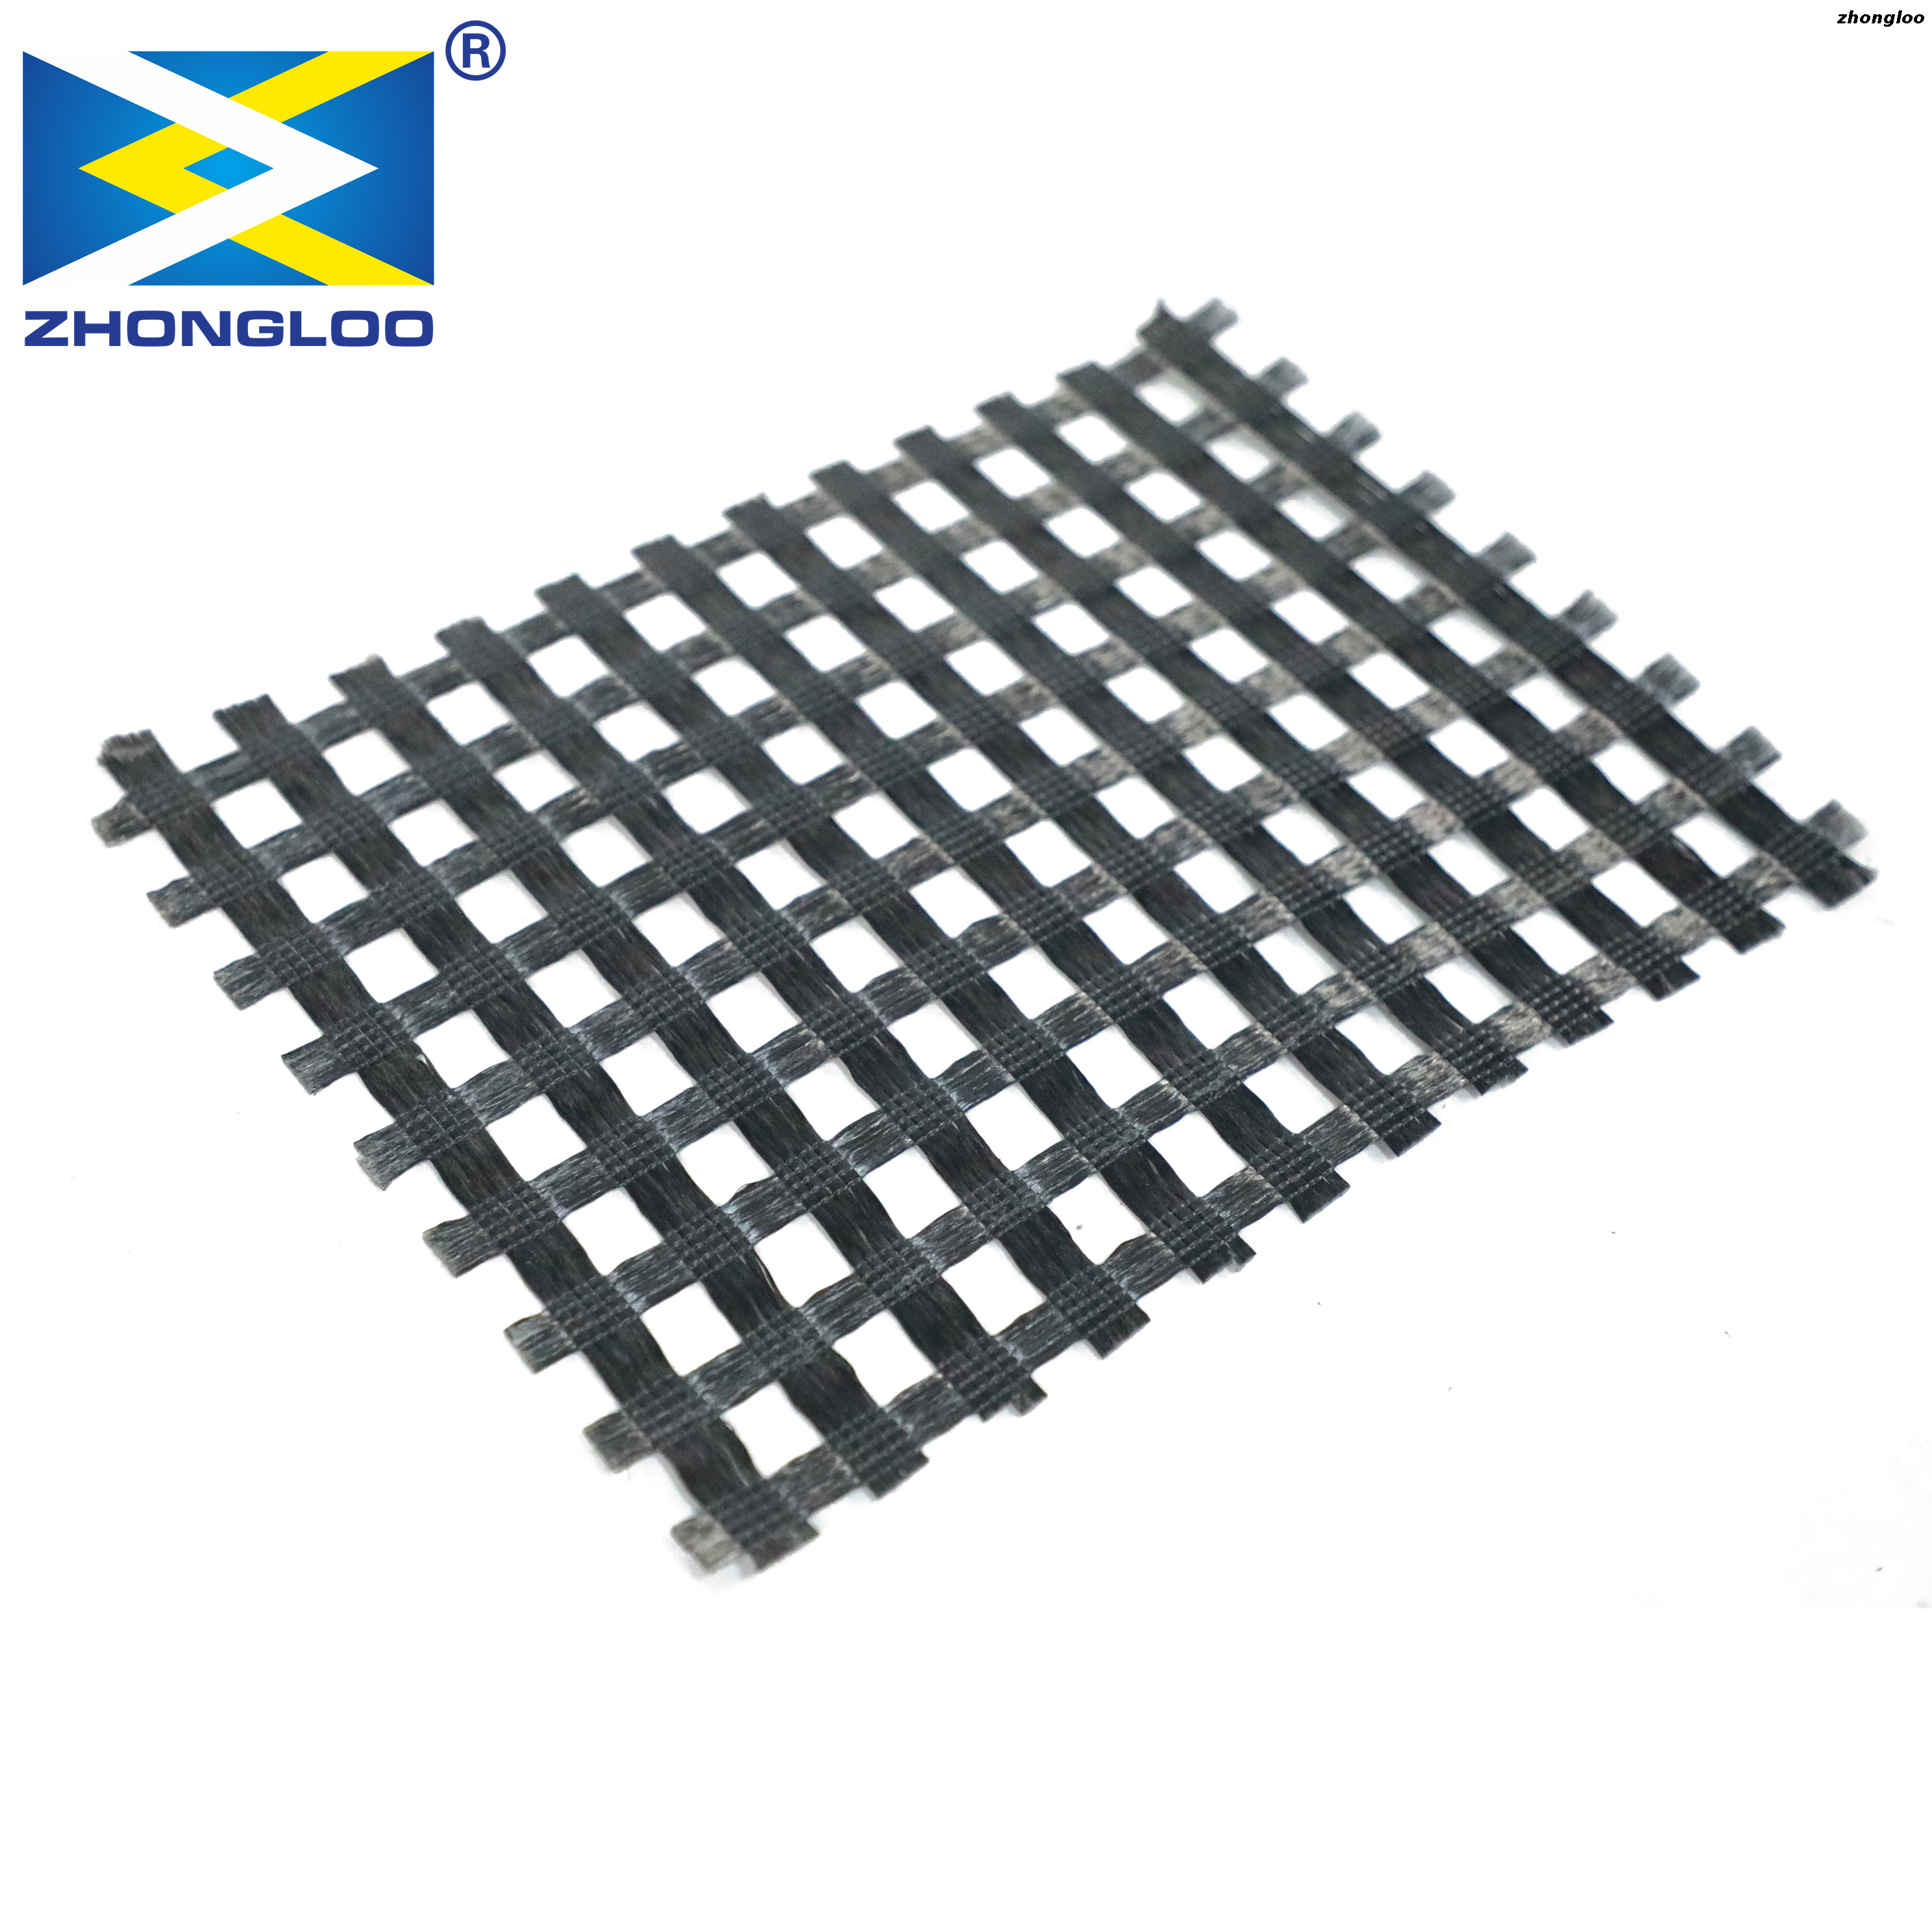 25-200 Kn/m Road Construction Uniaxial Biaxial PVC Coated Polyester Geogrid Mesh